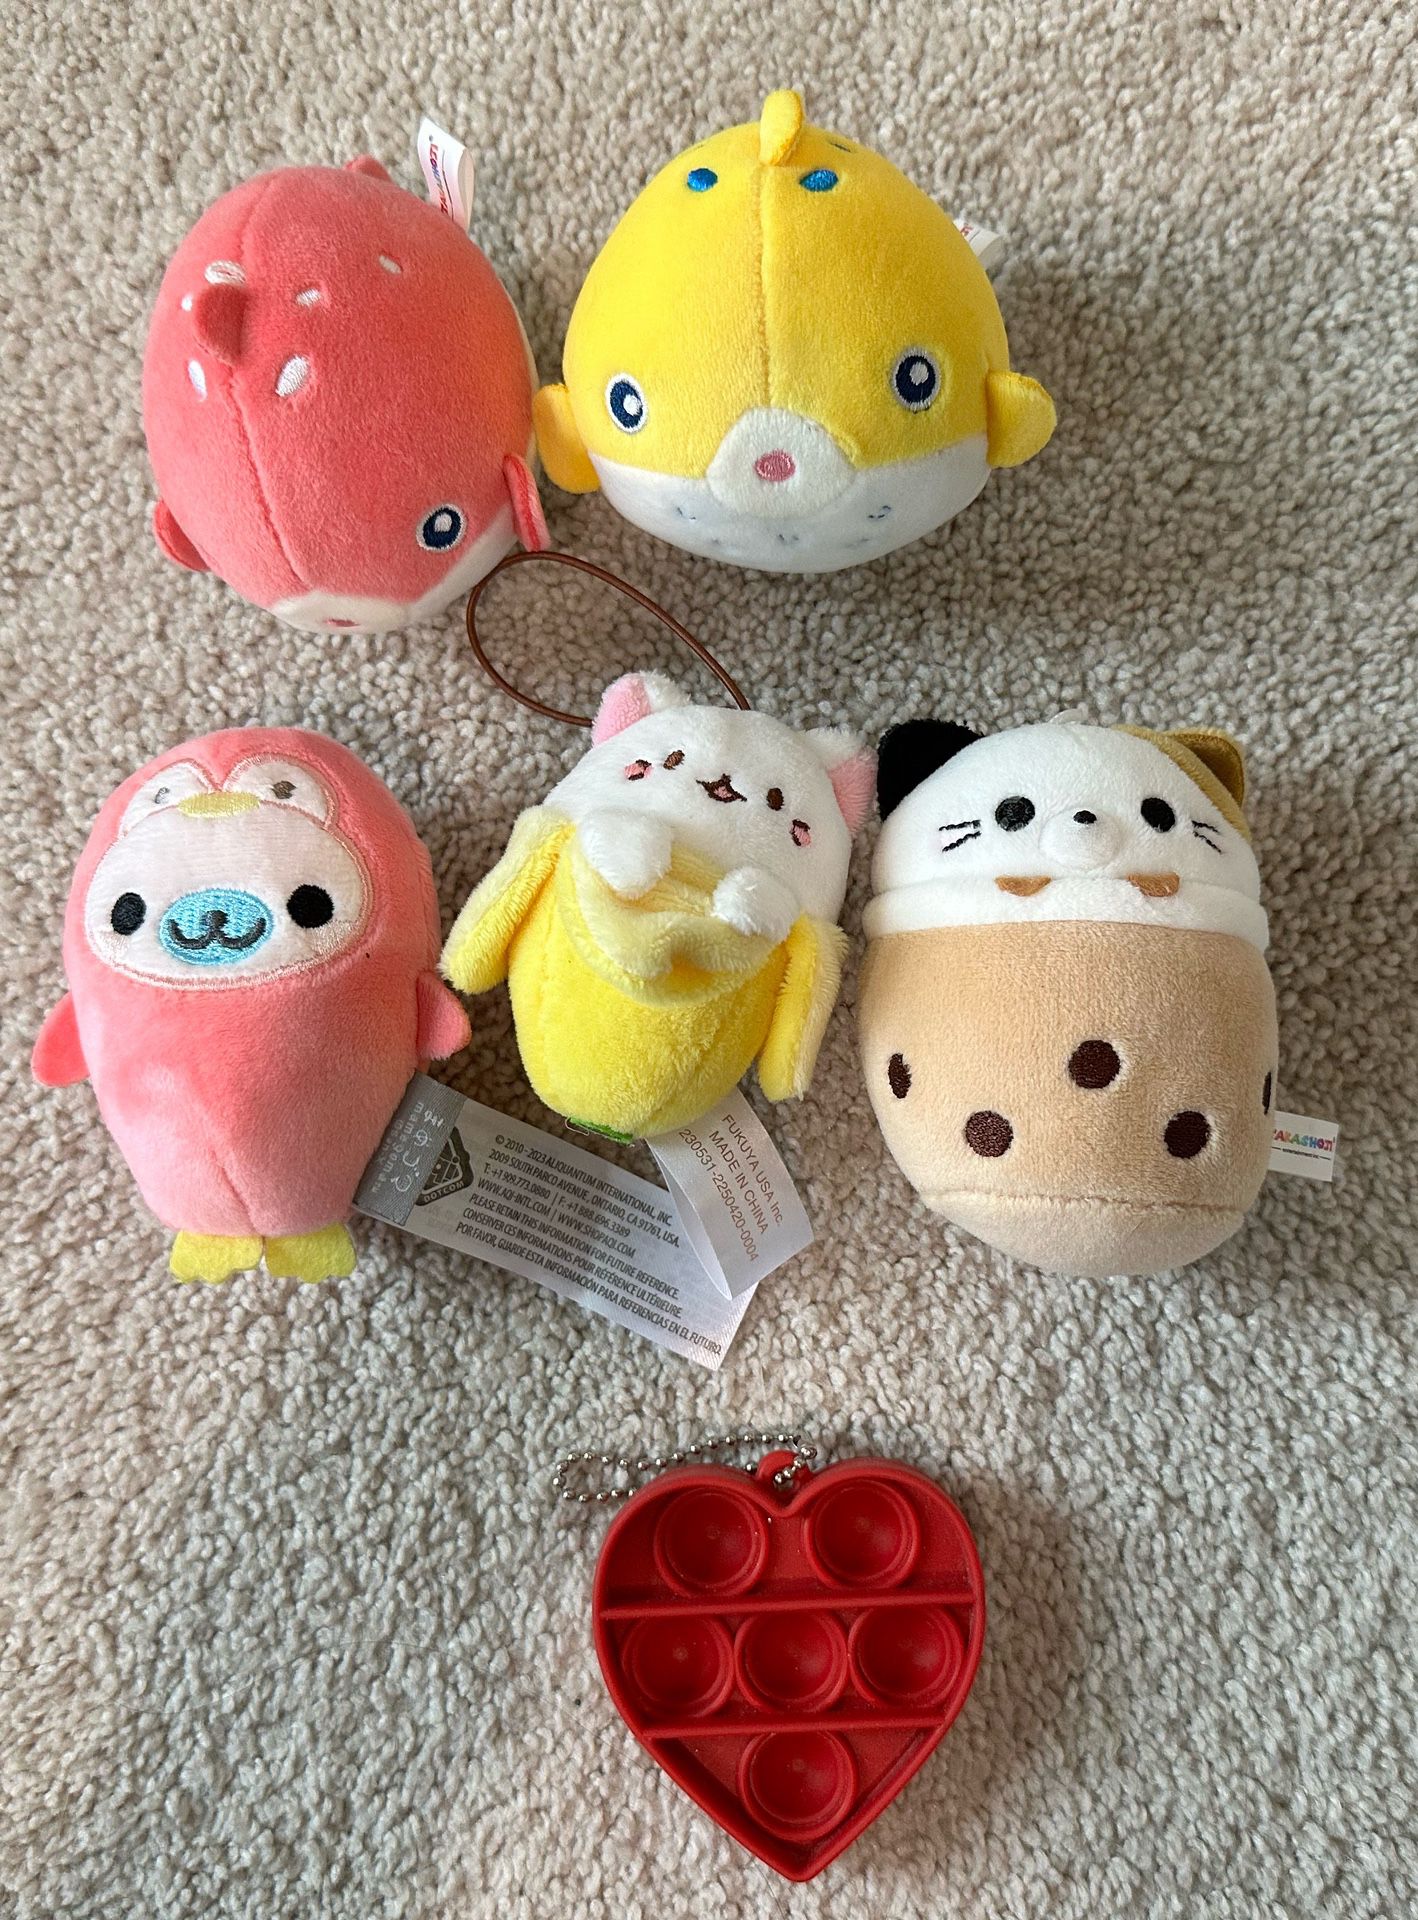 Lot of 6 small plushes